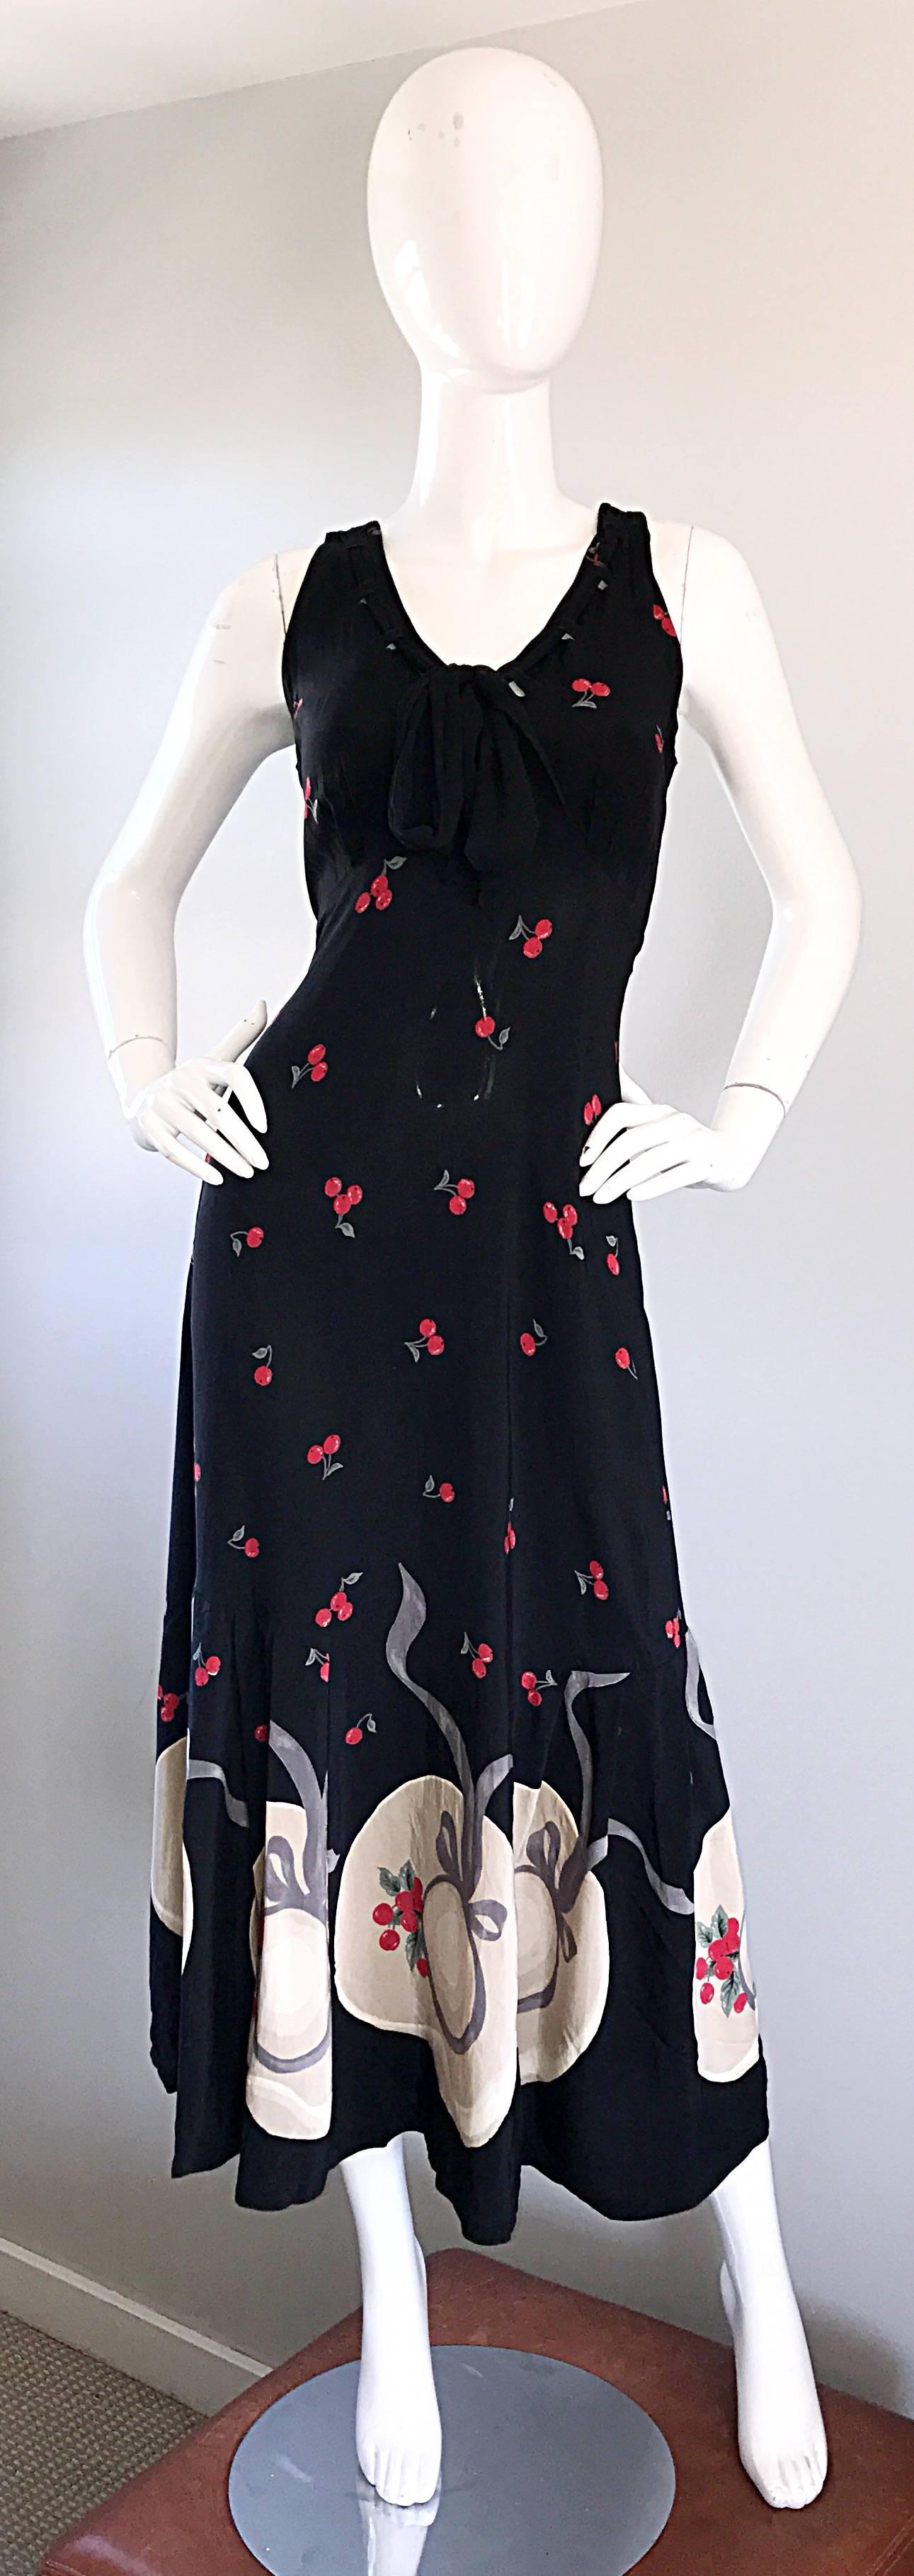 Chic 1990s KAREN ALEXANDER black, red, green, taupe and ivory cherry and hat printed novelty sleeveless maxi dress. Features cherries printed throughout the dress, with ivory and taupe sun hats at the hem. Super soft rayon. Black laces at bust ties